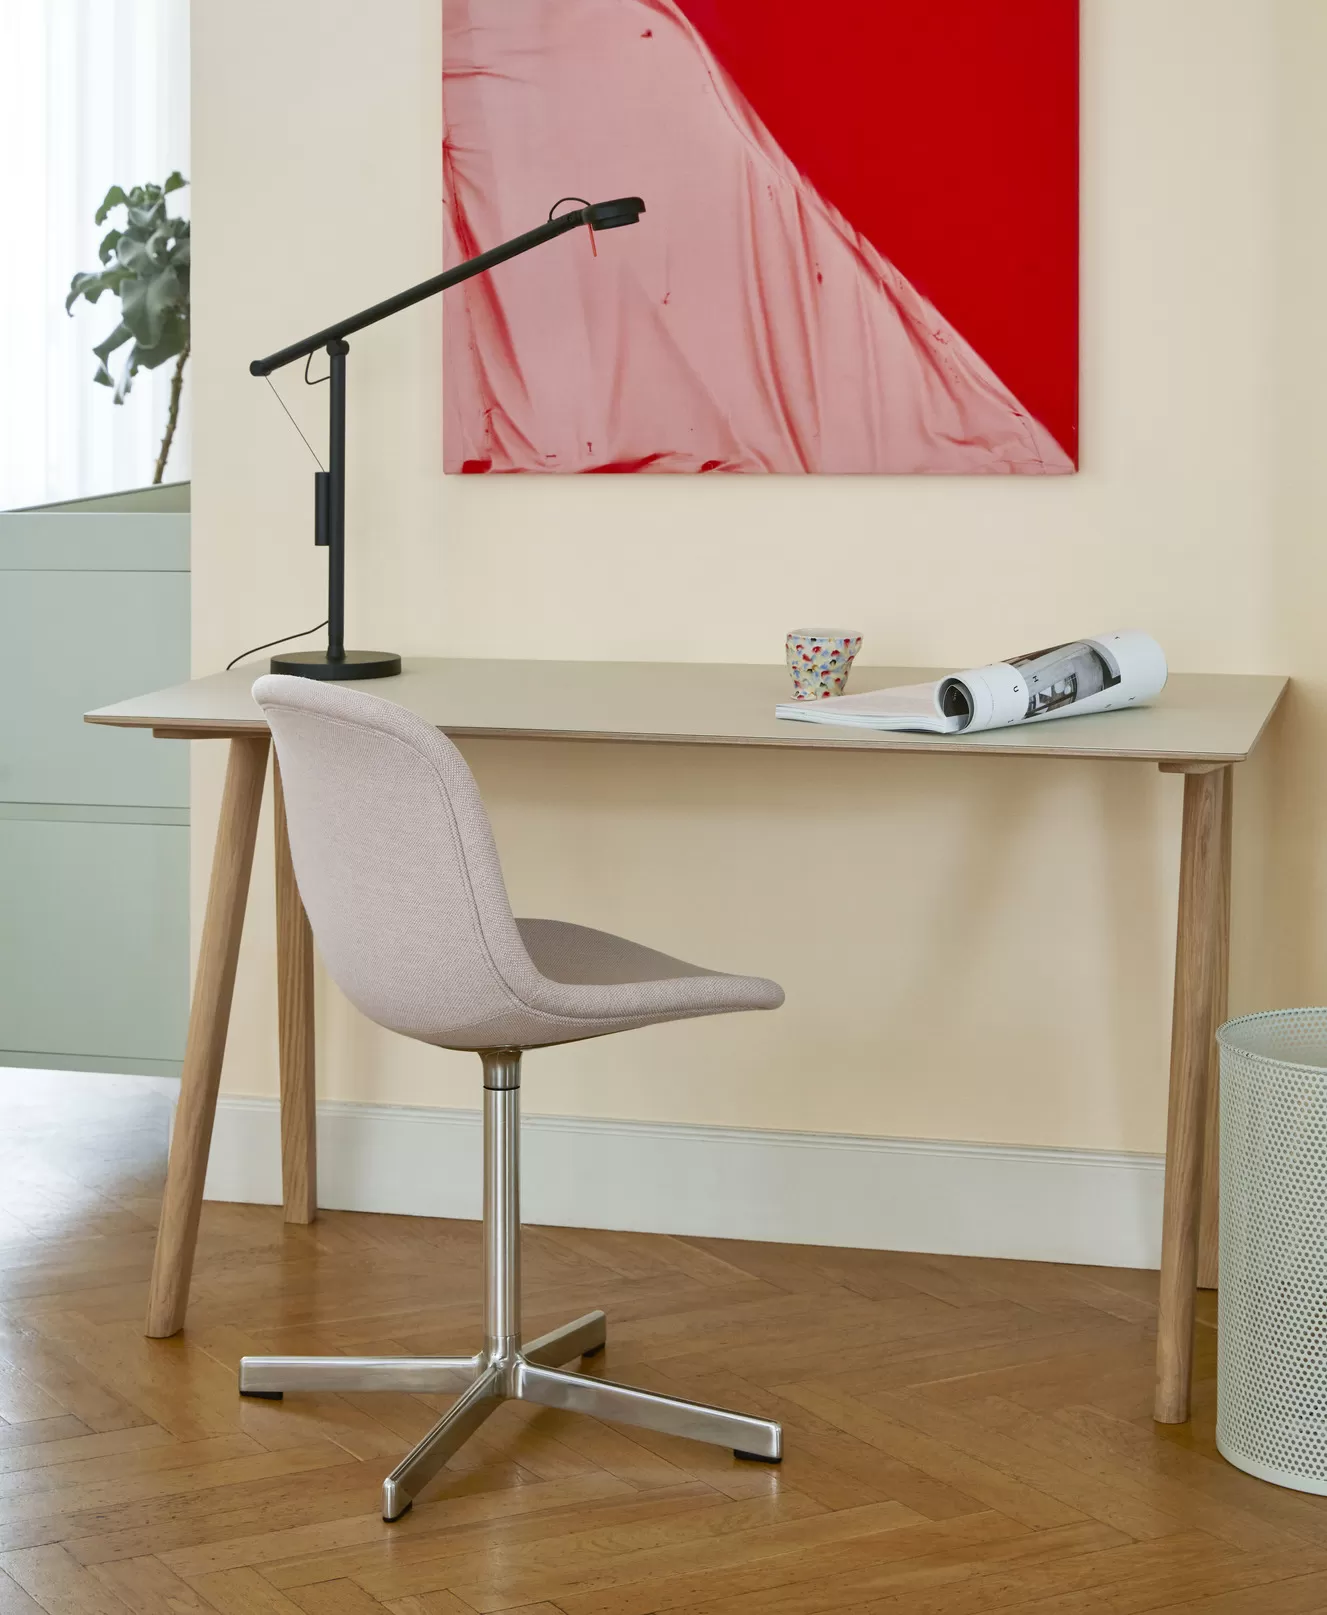 FIFTY-FIFTY MINI | Herman miller